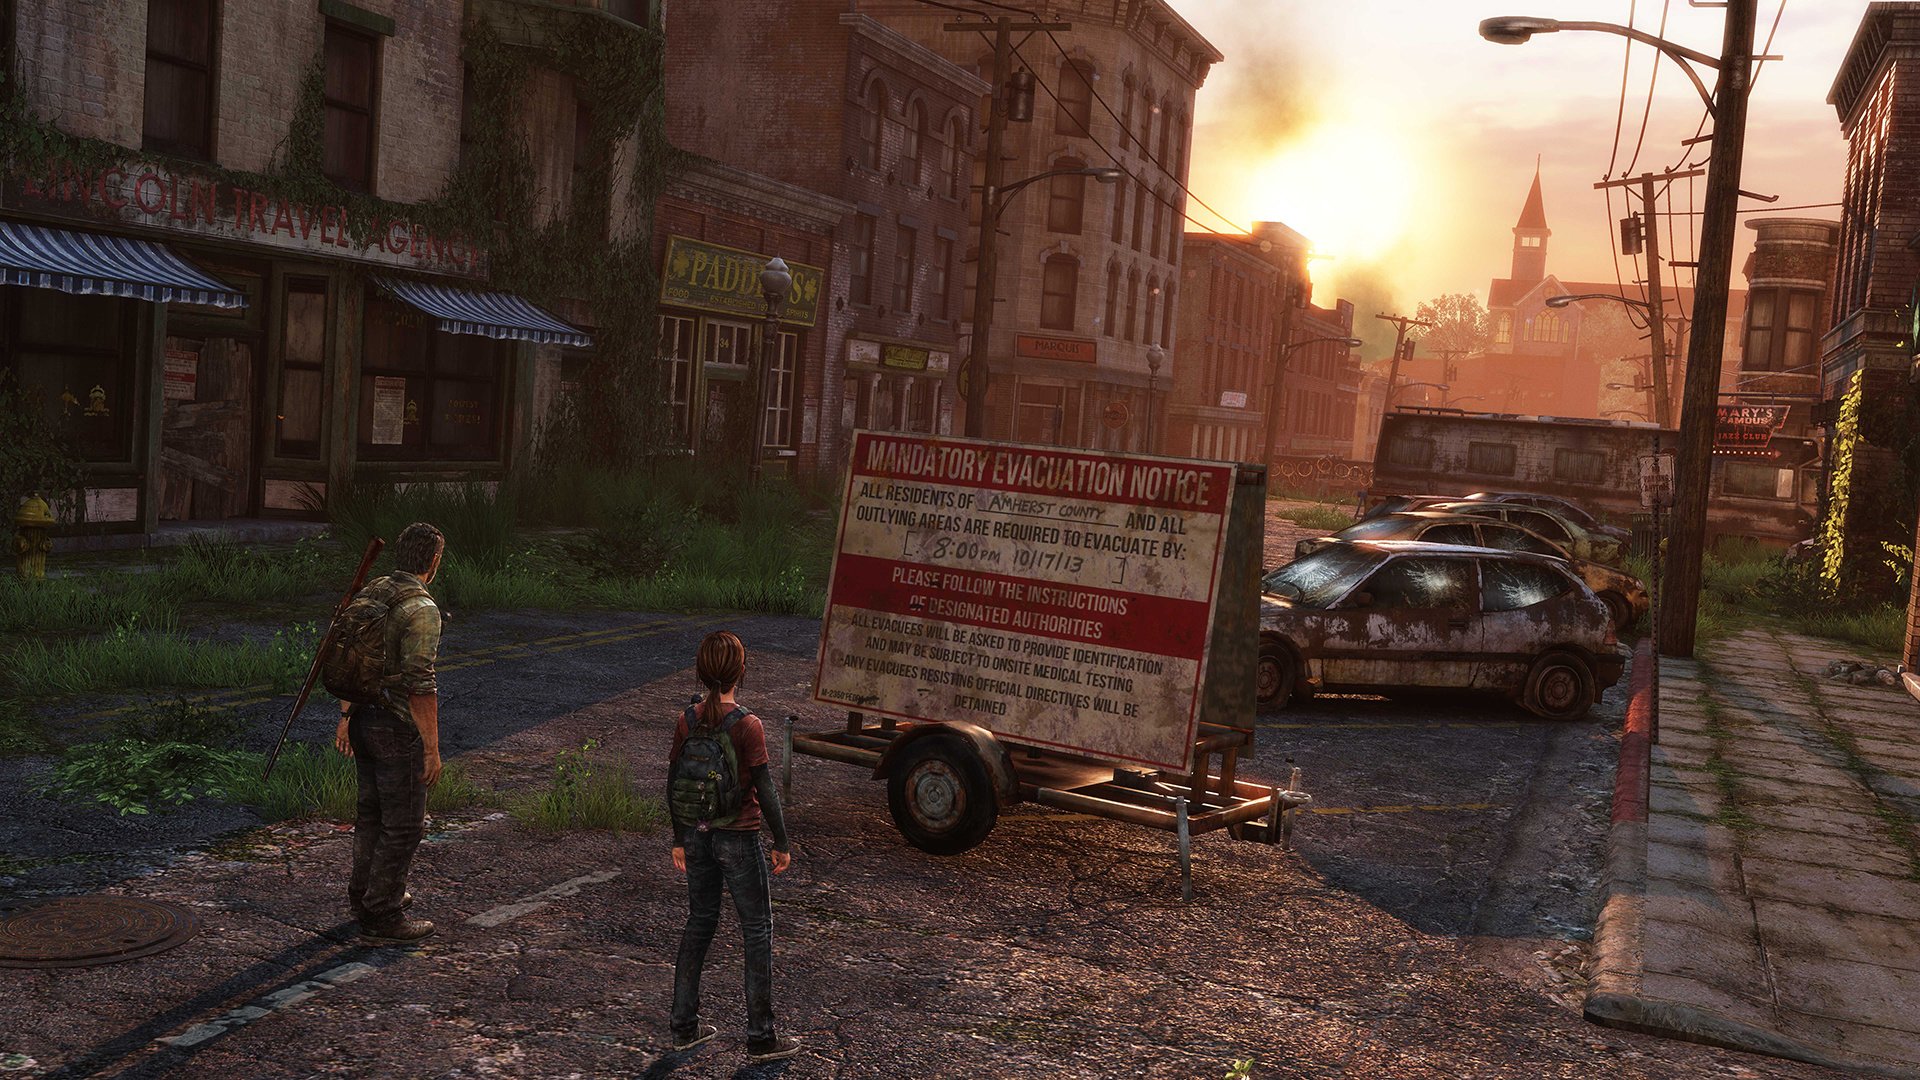 Exclusive screens from The Last of Us: Remastered